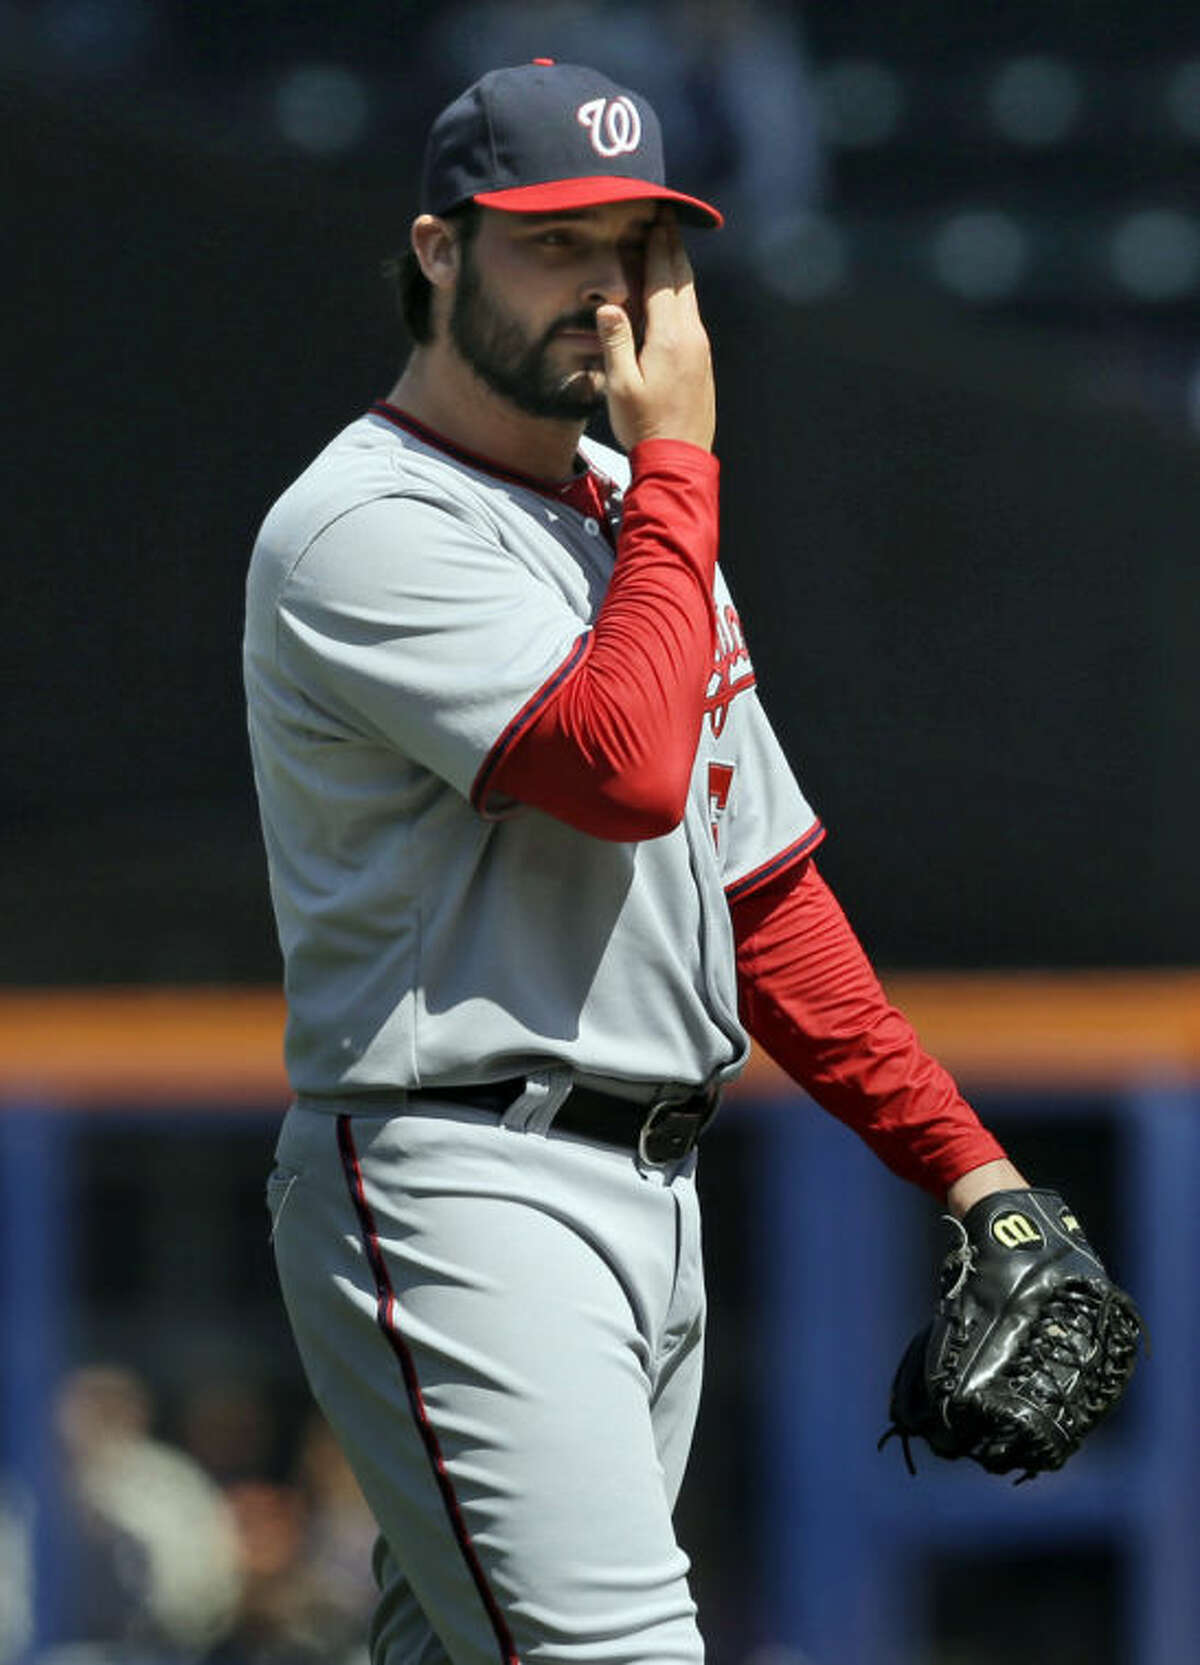 Washington Nationals pitcher Tanner Roark wipes his face during the first inning of the baseball game against the New York Mets at Citi Field, Thursday, April 3, 2014, in New York. (AP Photo/Seth Wenig)